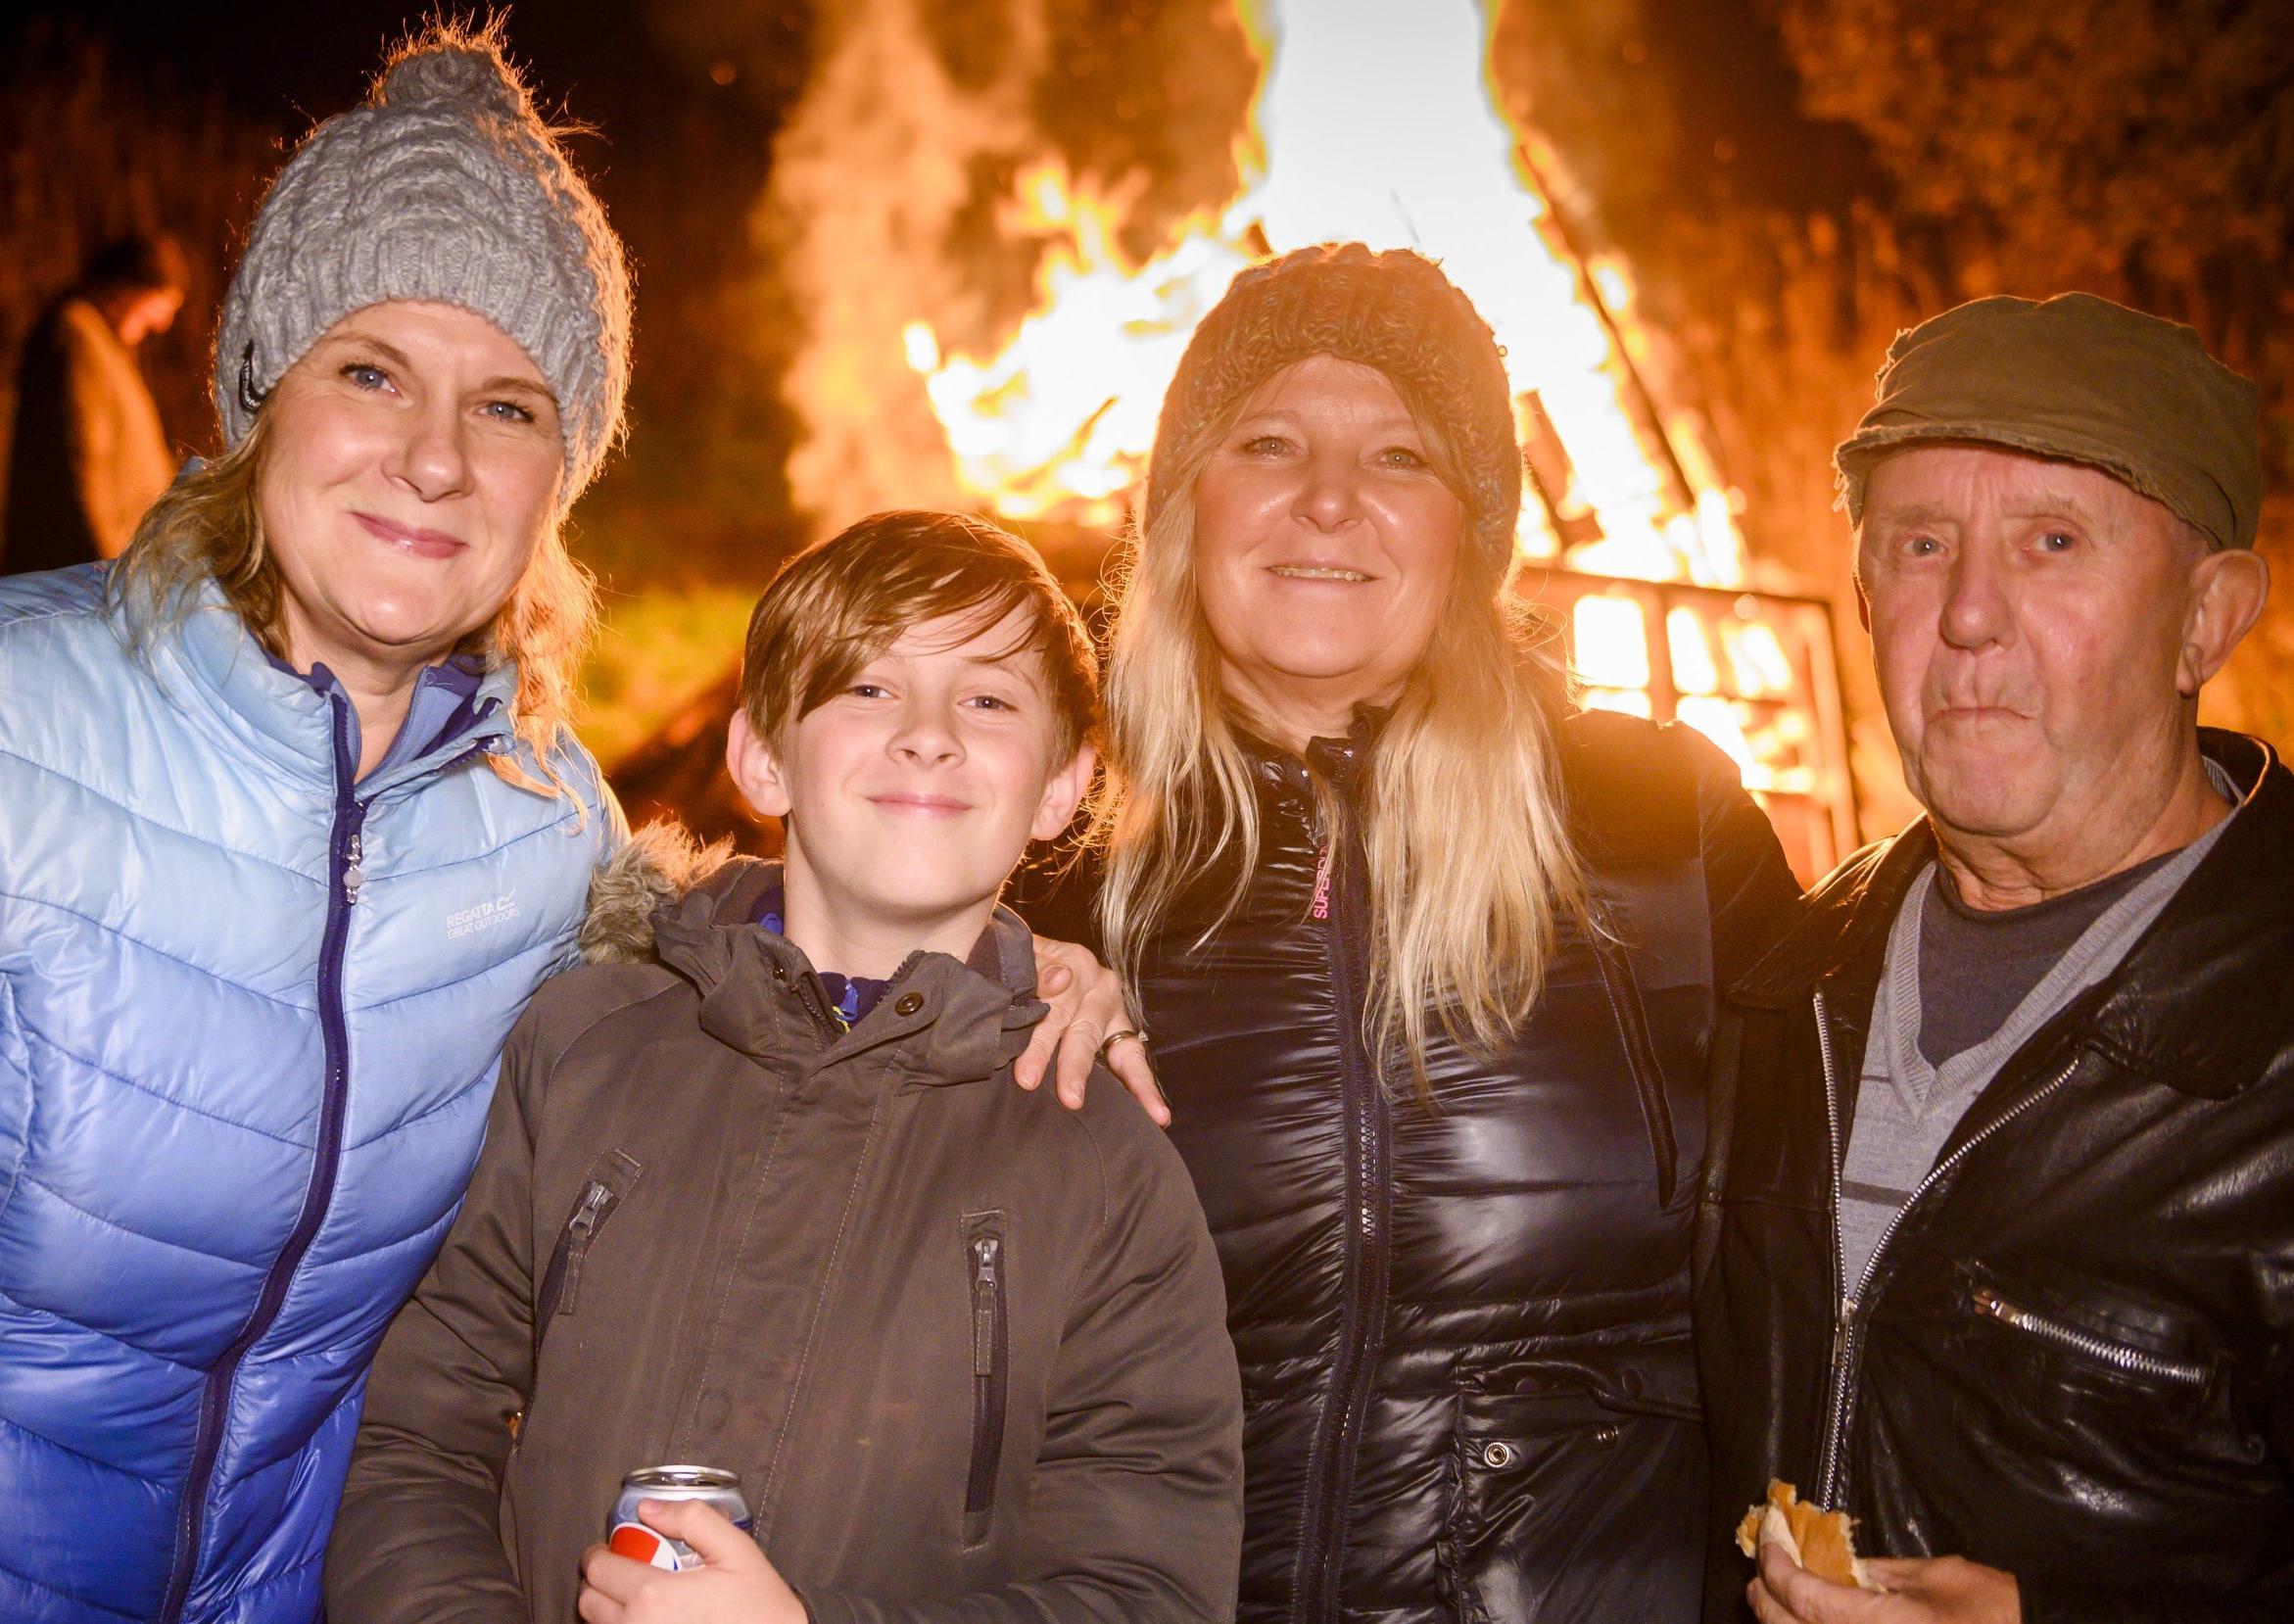 Lauder fireworks display 2019

Gina and Archie Somers, with Yvonne and Tony Battersby

Pic Phil Wilkinson 
info@philspix.com